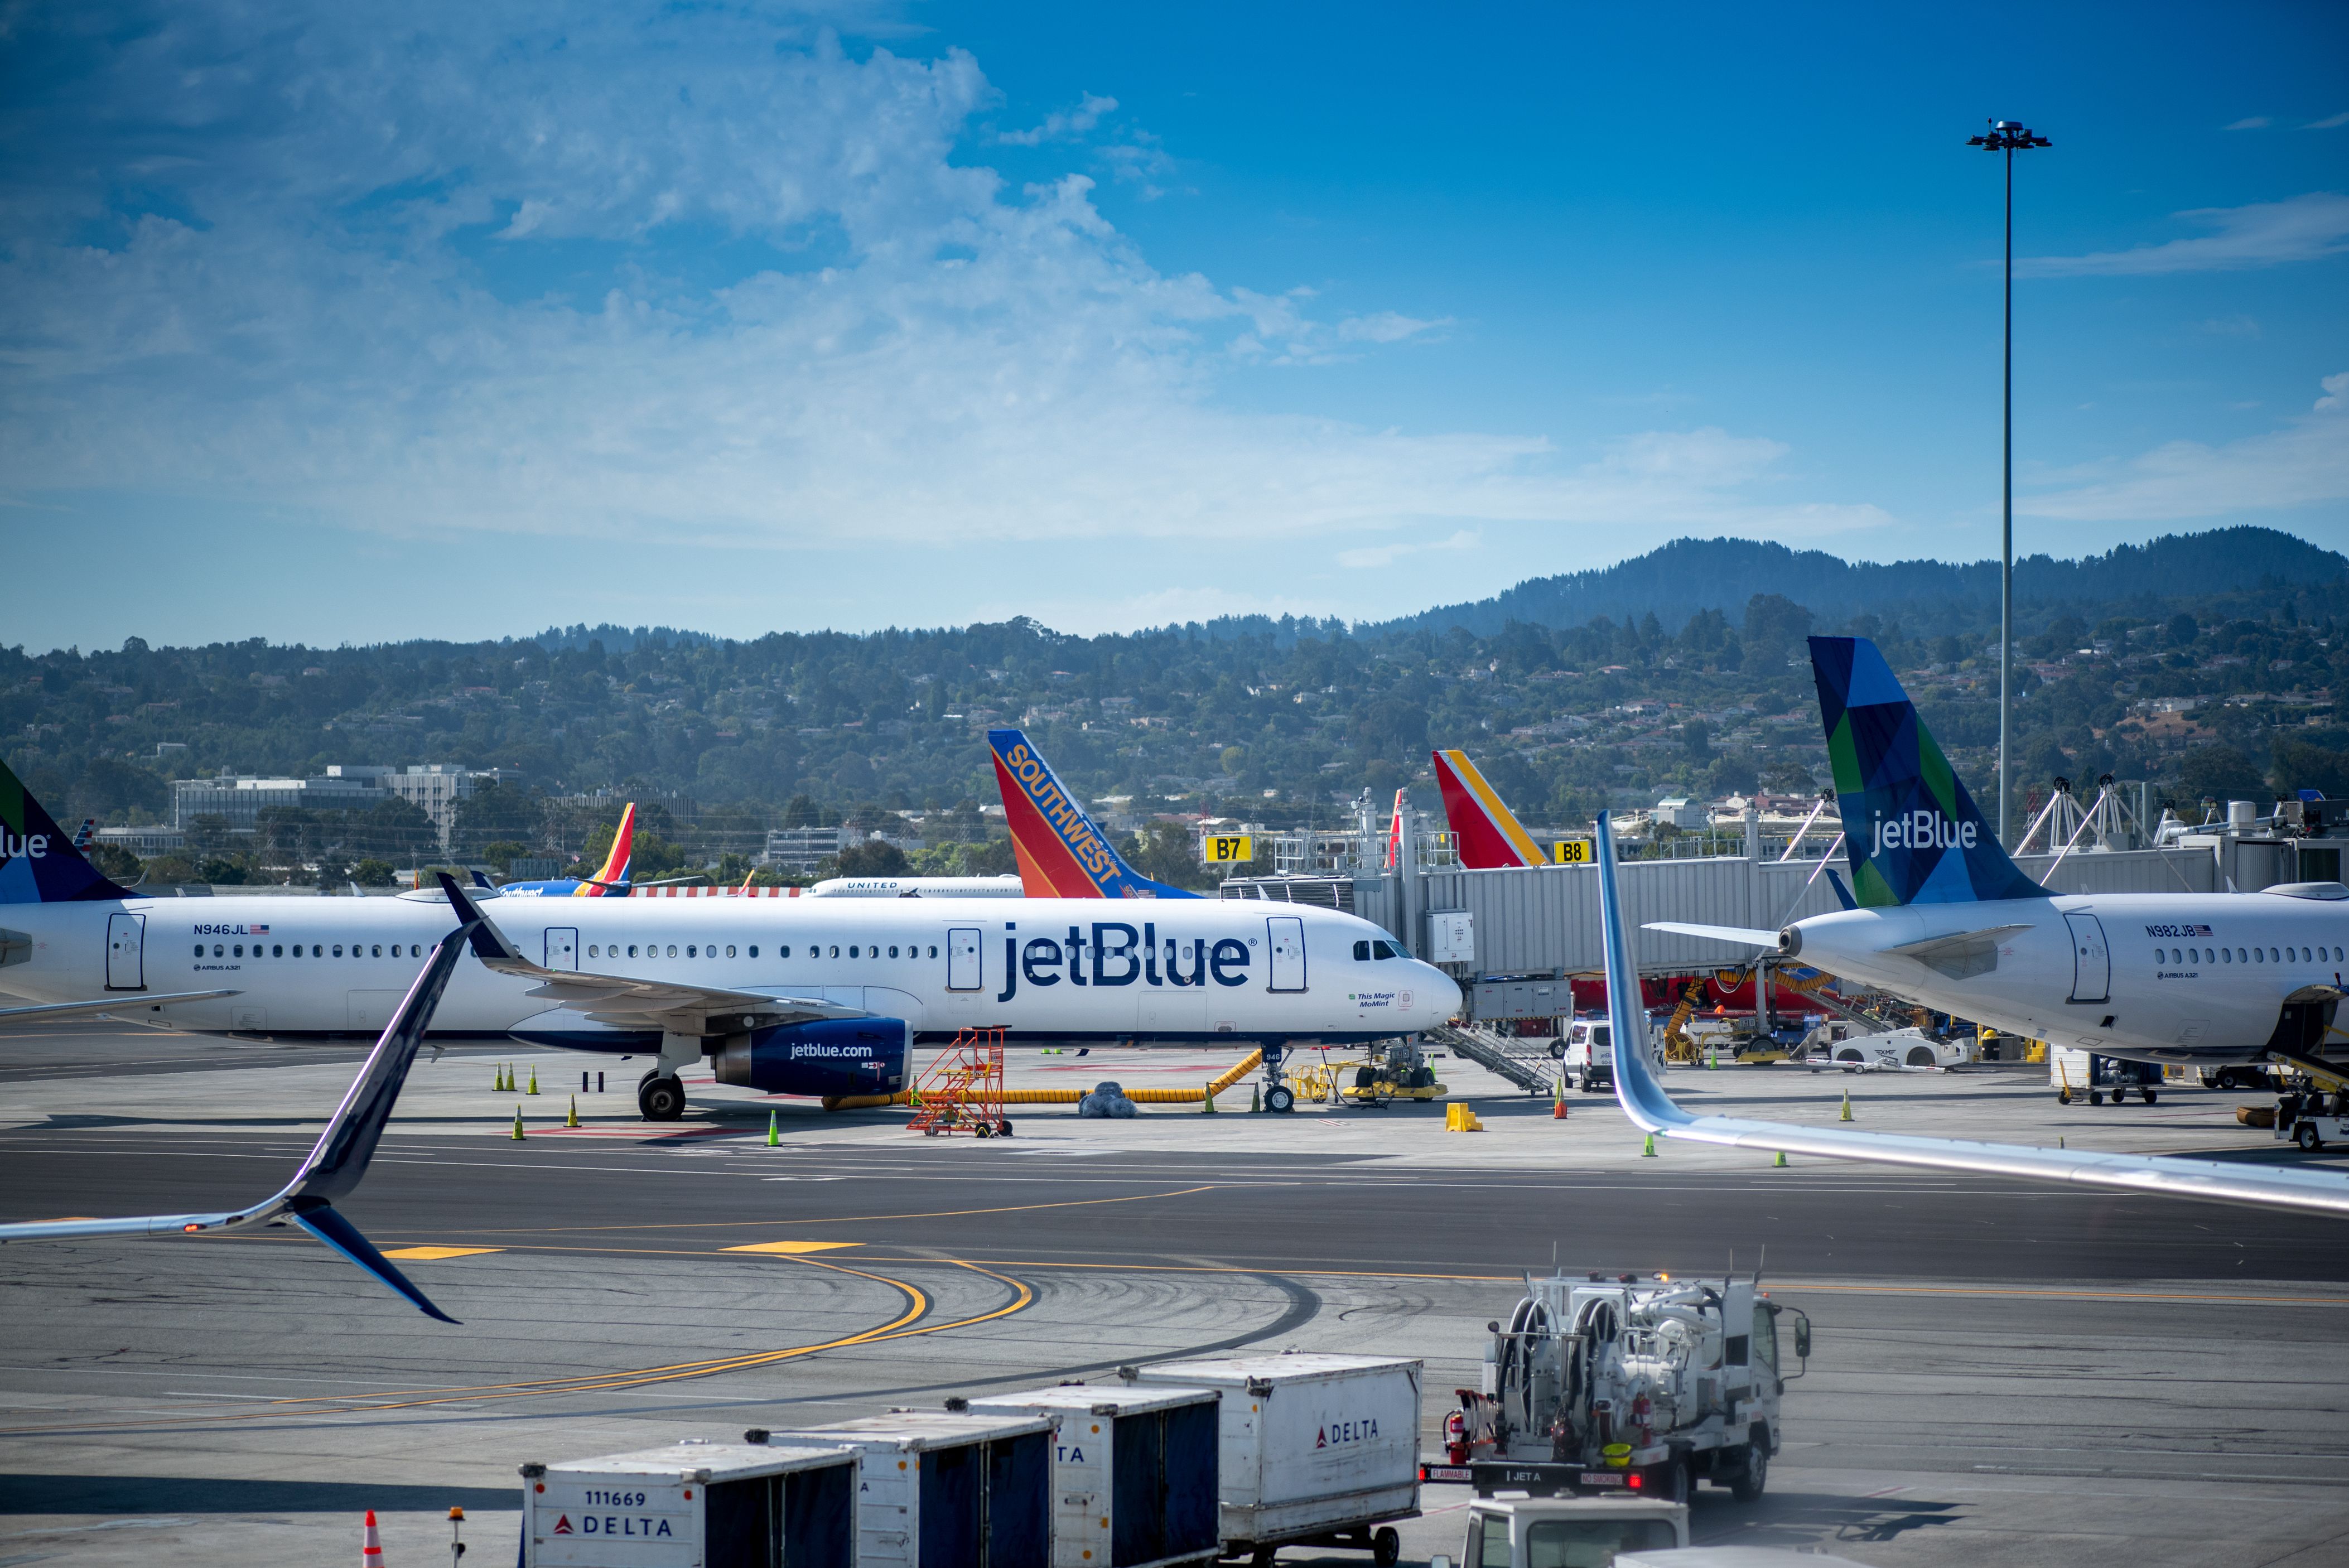 A Jetblue aircraft on the apron at San Francisco Airport.